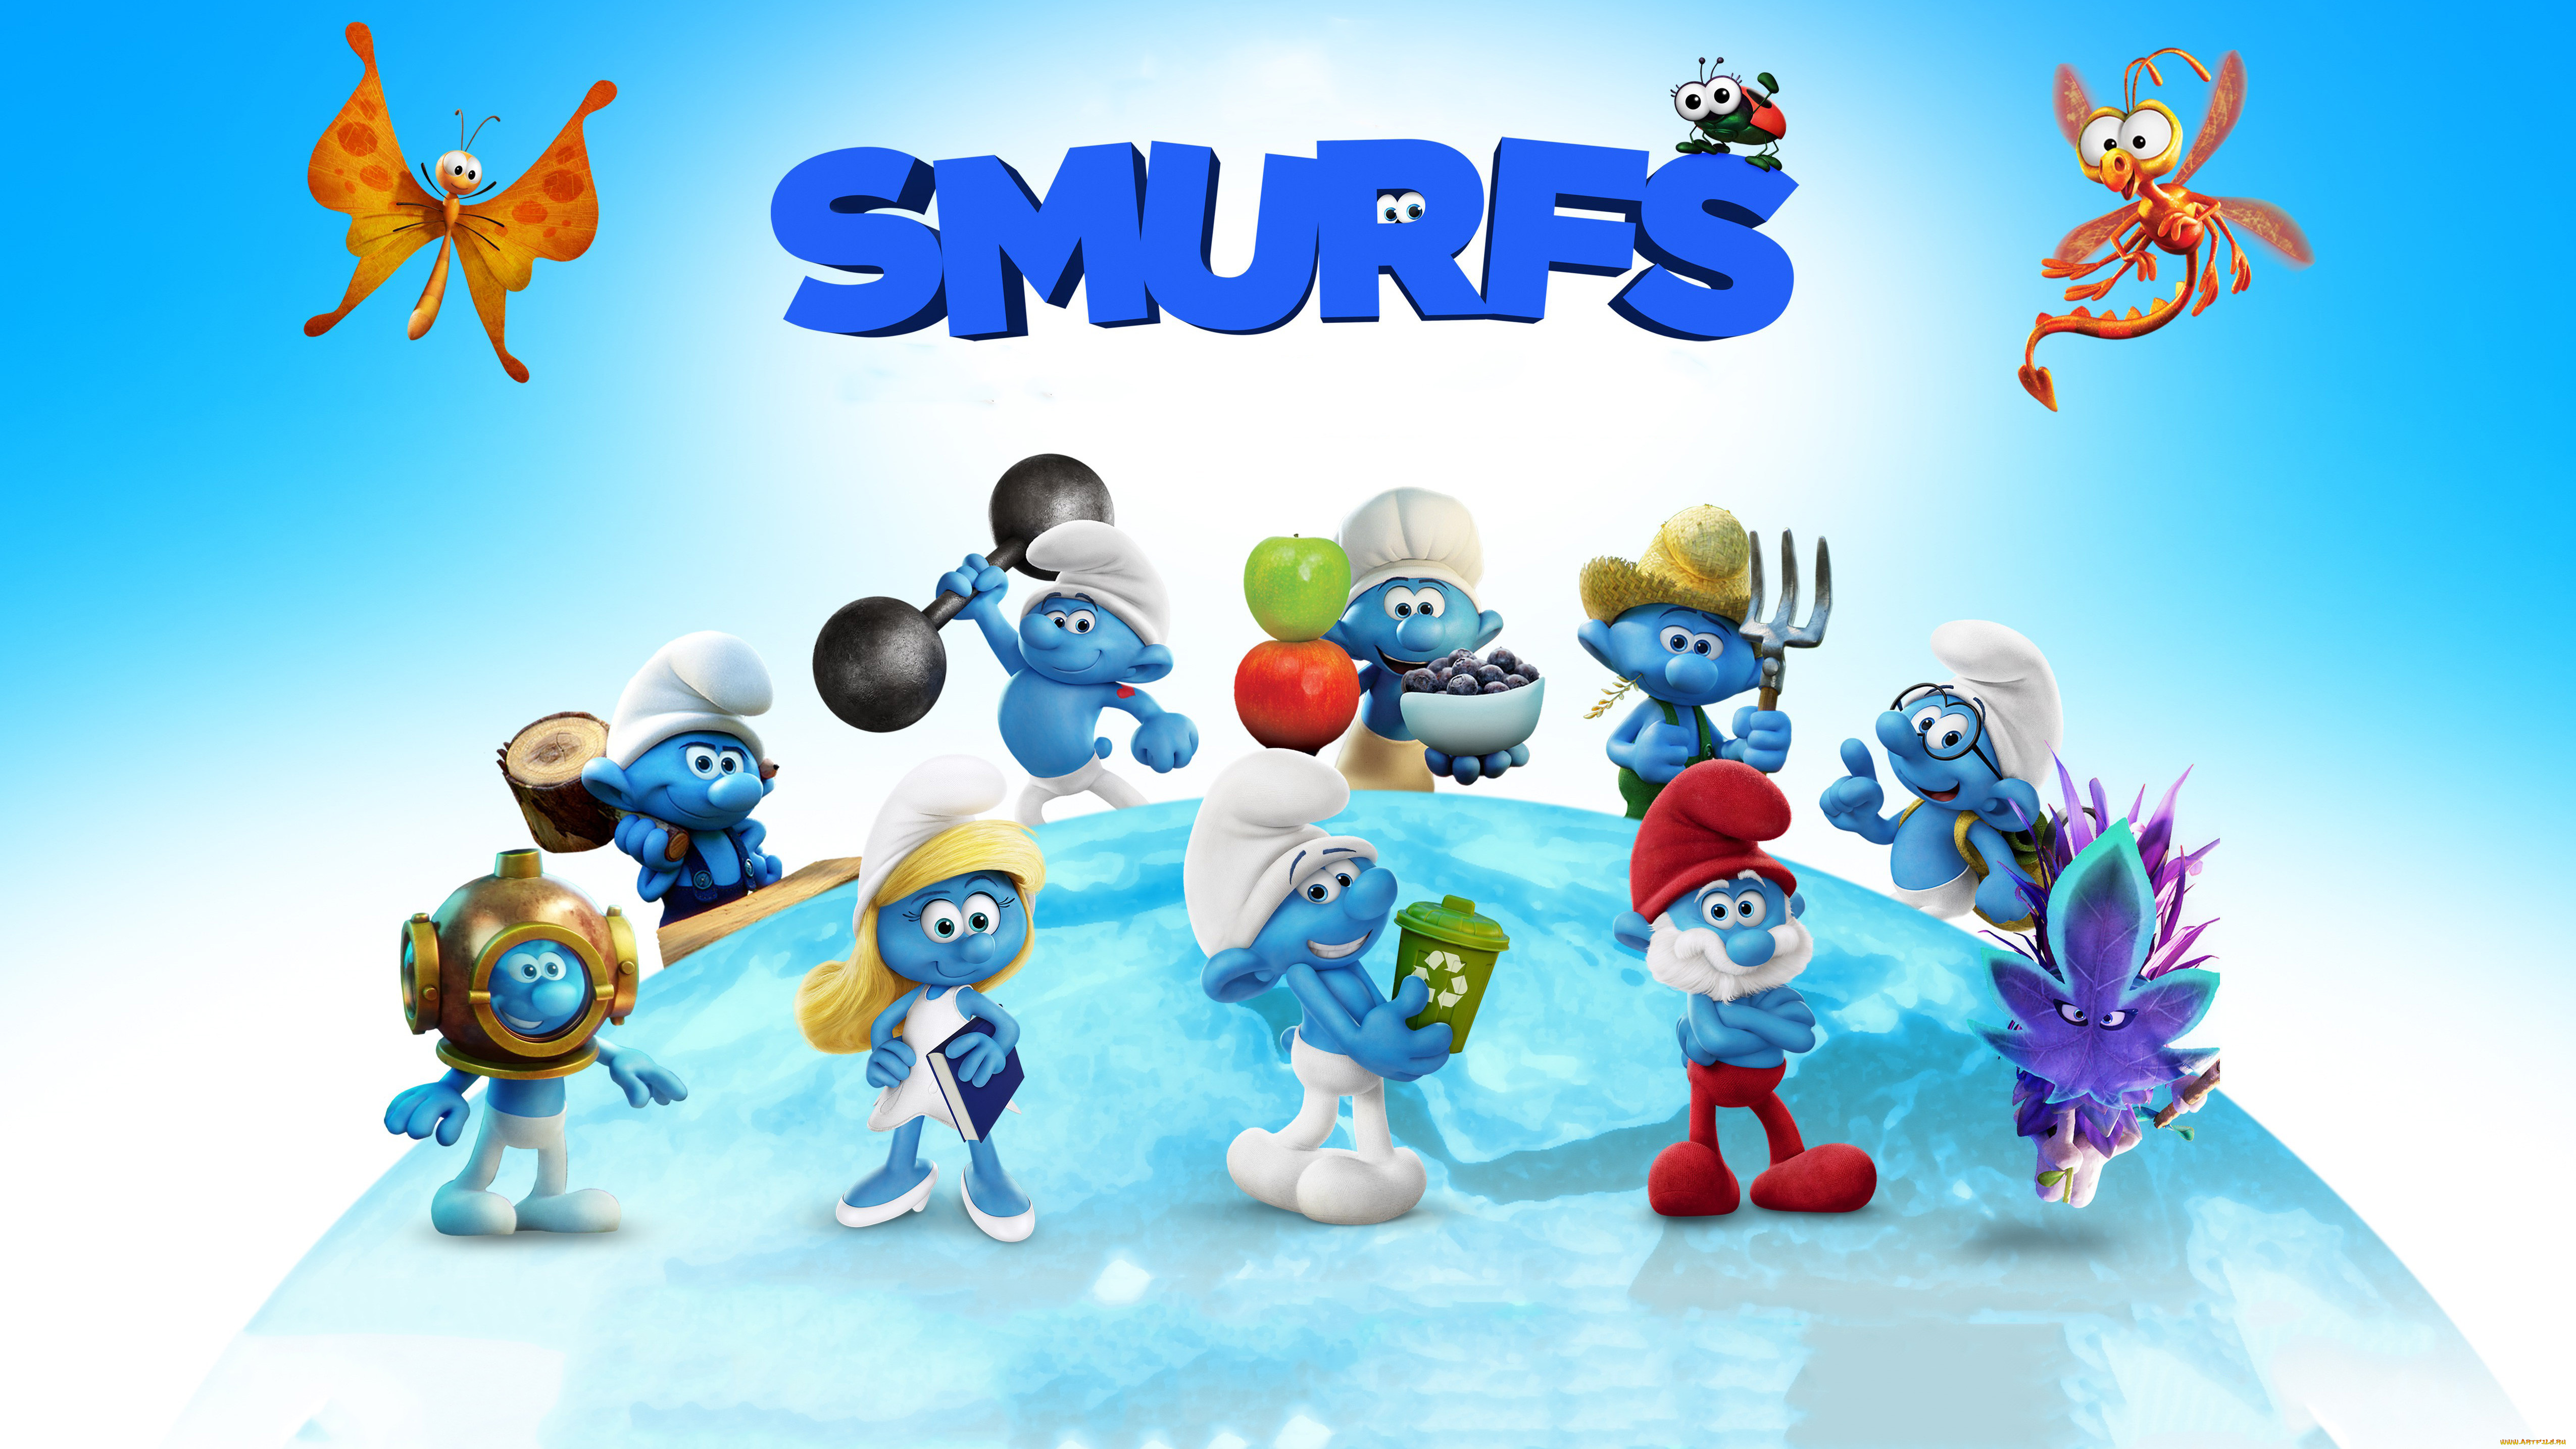 Smurfs the lost village. Смурфики (the Smurfs) 2011. Смурфики: Затерянная деревня (2017). Смурфики Затерянная деревня смурфиков. Смурфы фон.